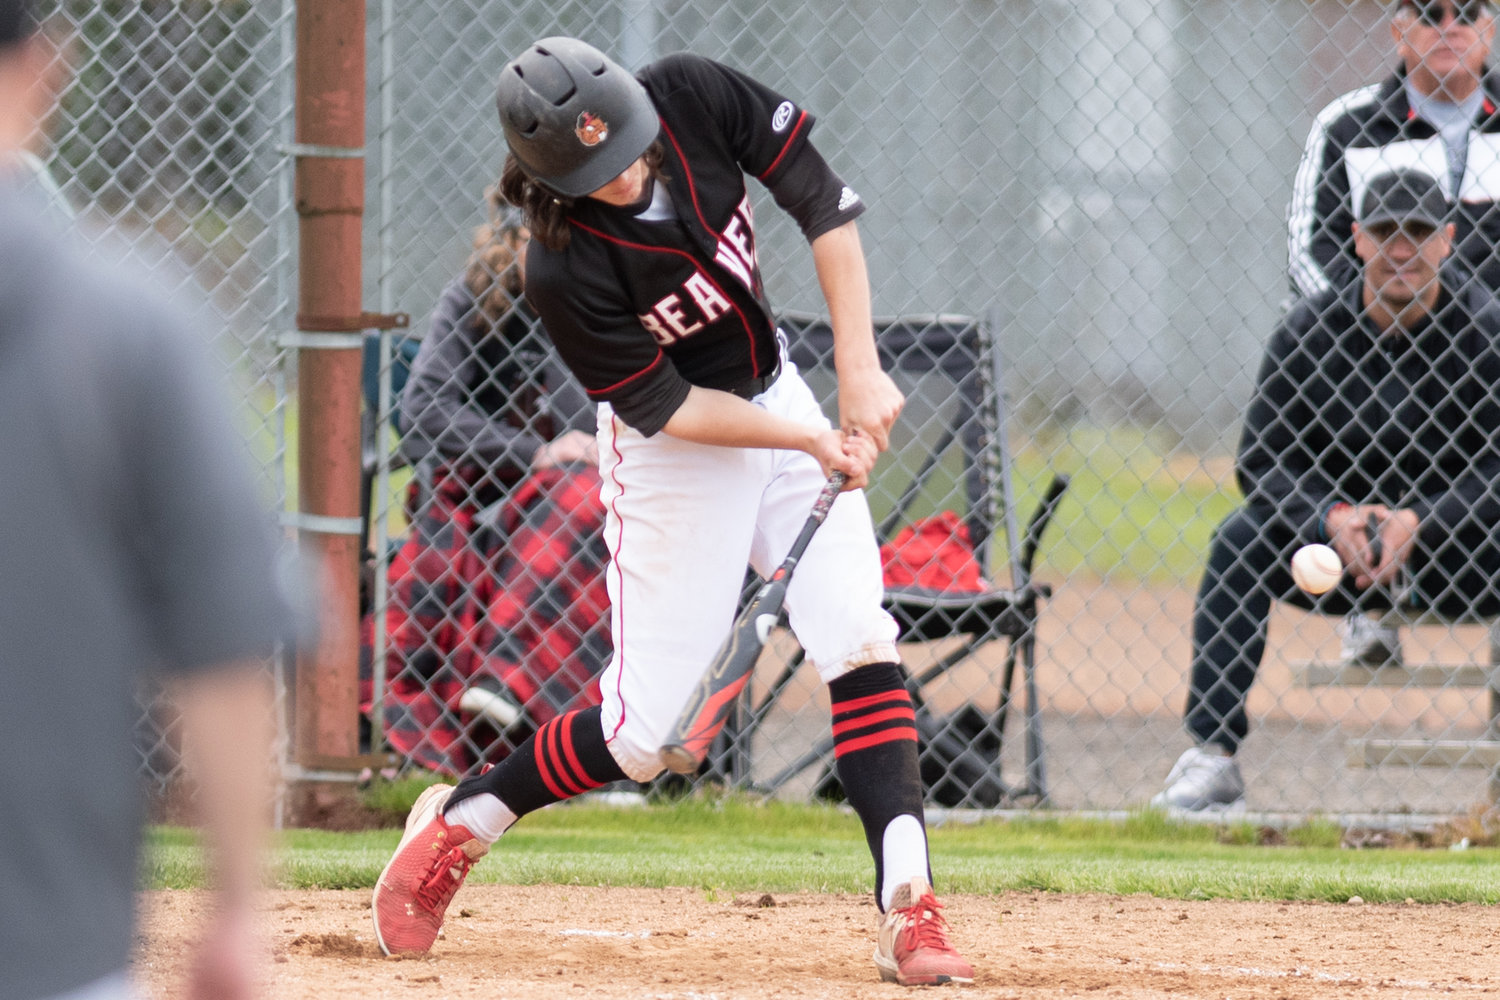 Tenino's Brody Noonan swings low at a pitch against King's Way Christian May 13 in the 1A Evergreen District playoffs in Castle Rock.